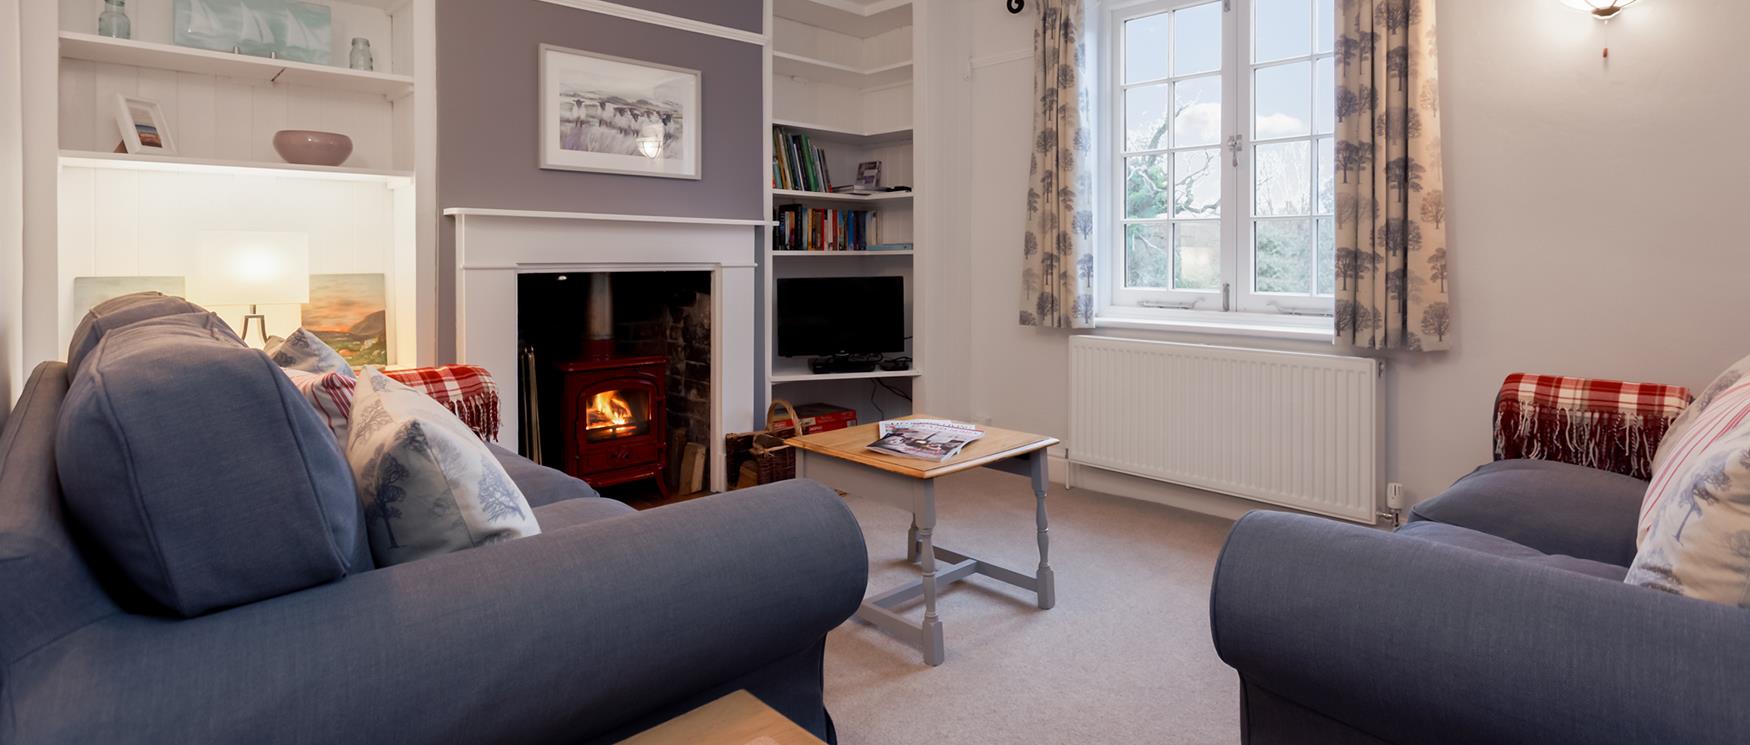 Cosy Holiday Cottage in Hampshire